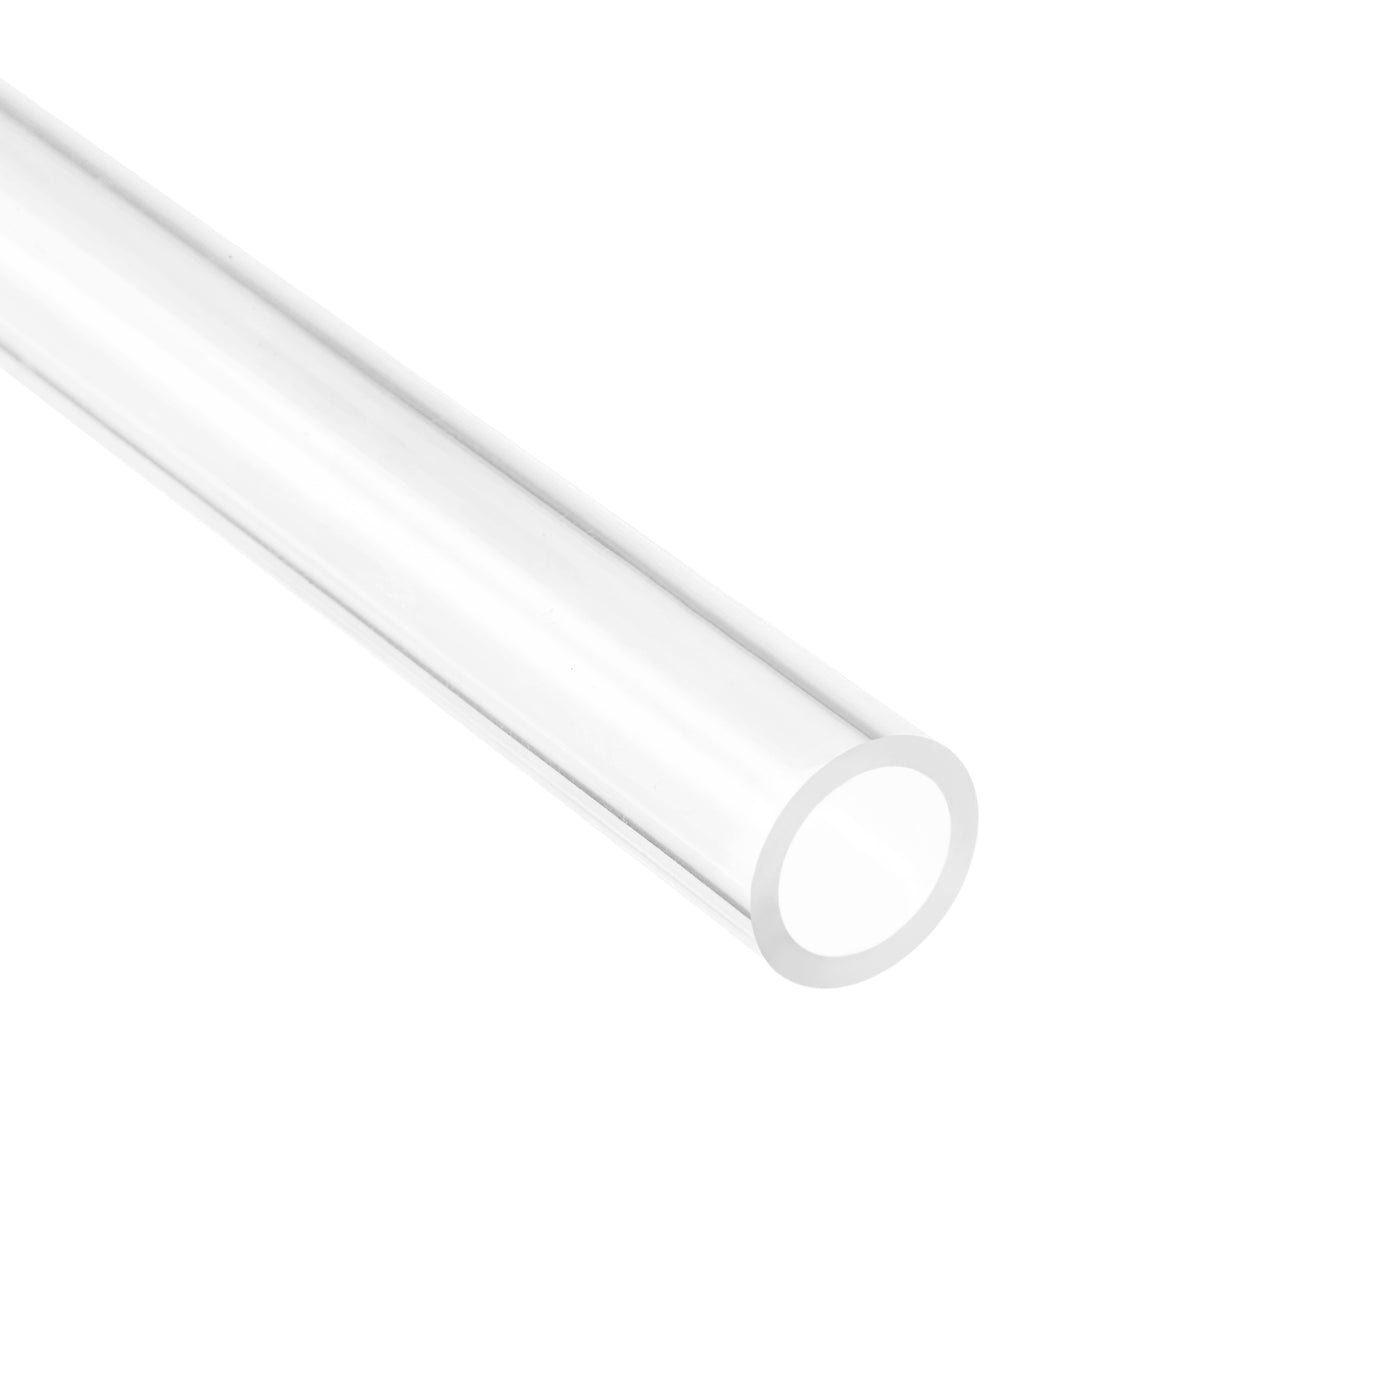 uxcell Uxcell Clear Rigid Acrylic Pipe 10mm ID x 14mm OD x 0.5m, 1.8mm Wall Round Tube